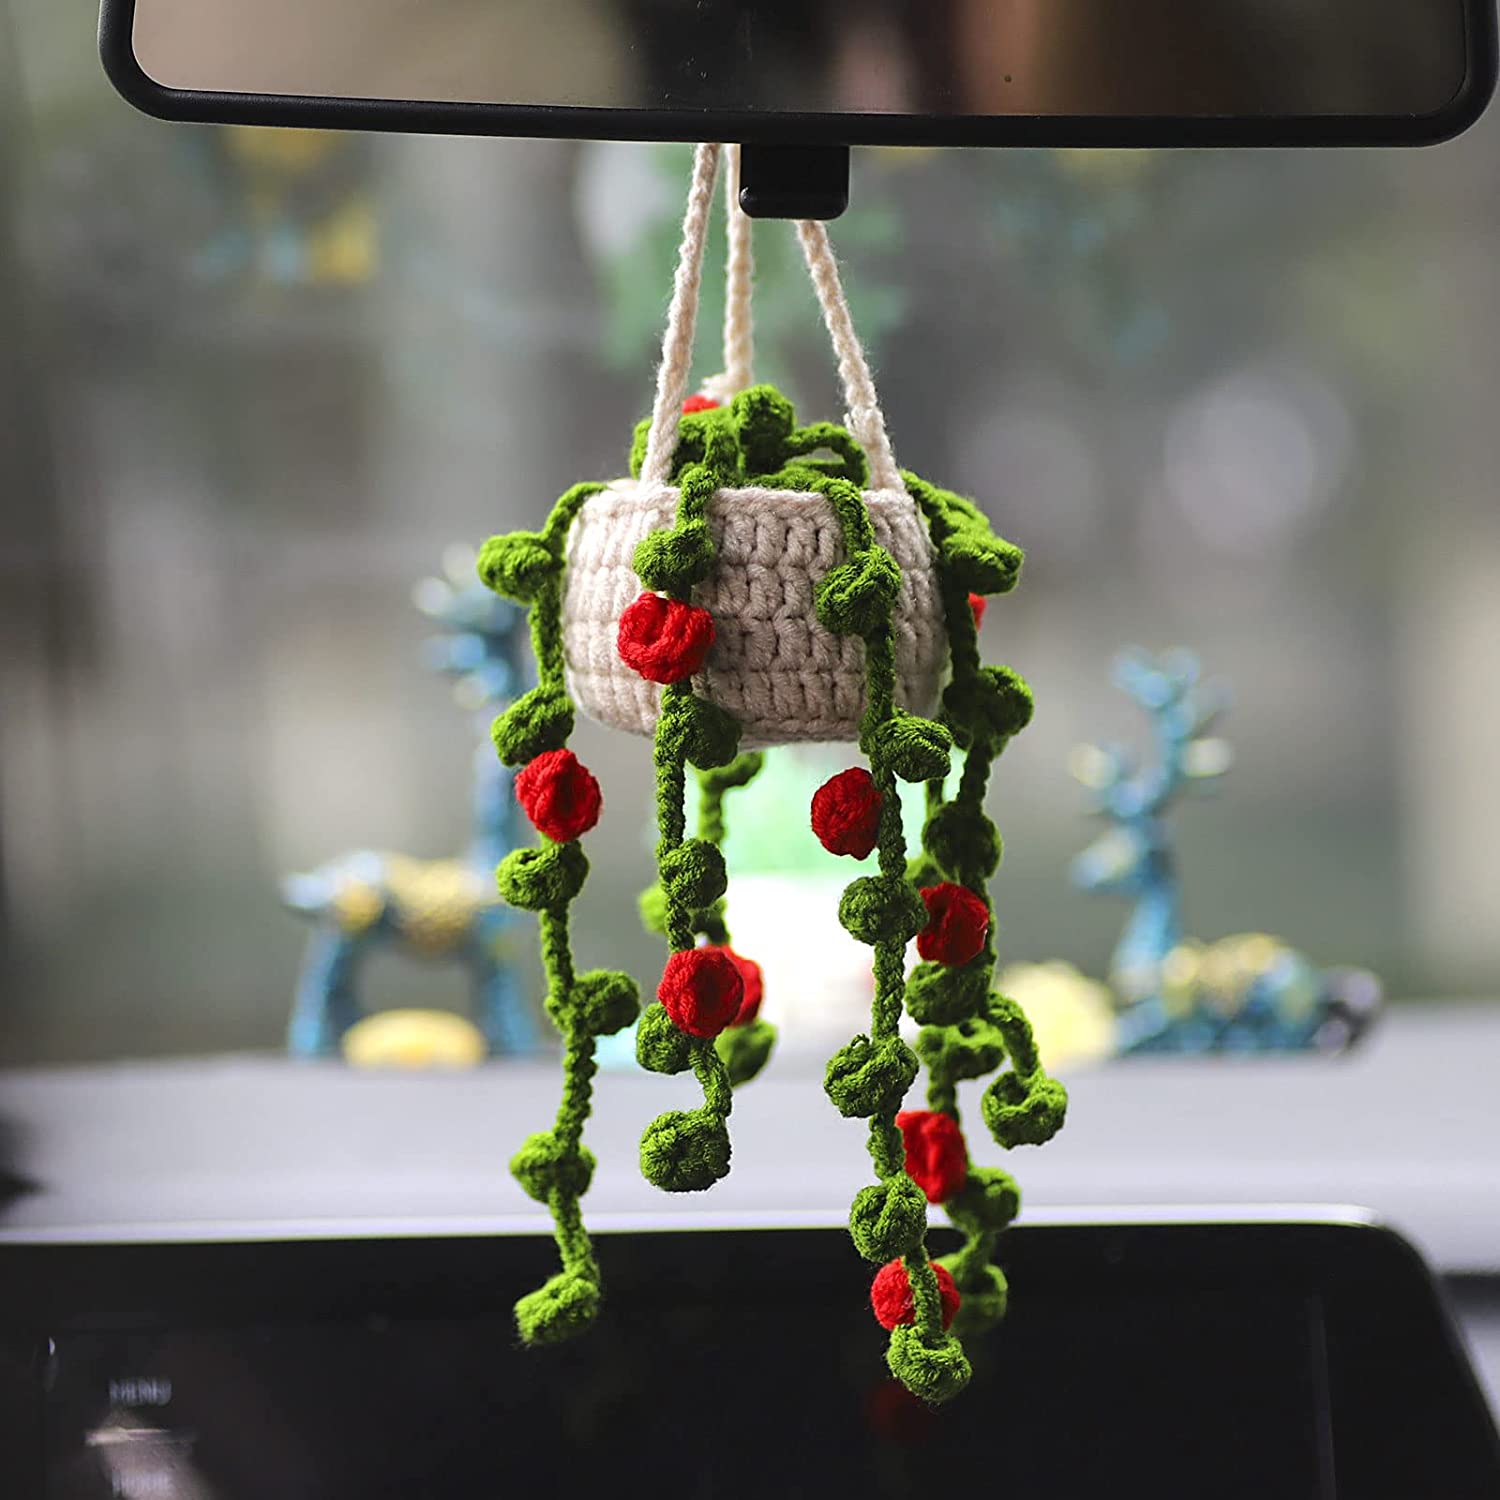 Handmade Knitted Car Mirror Hanging Accessories Cute Potted Plants